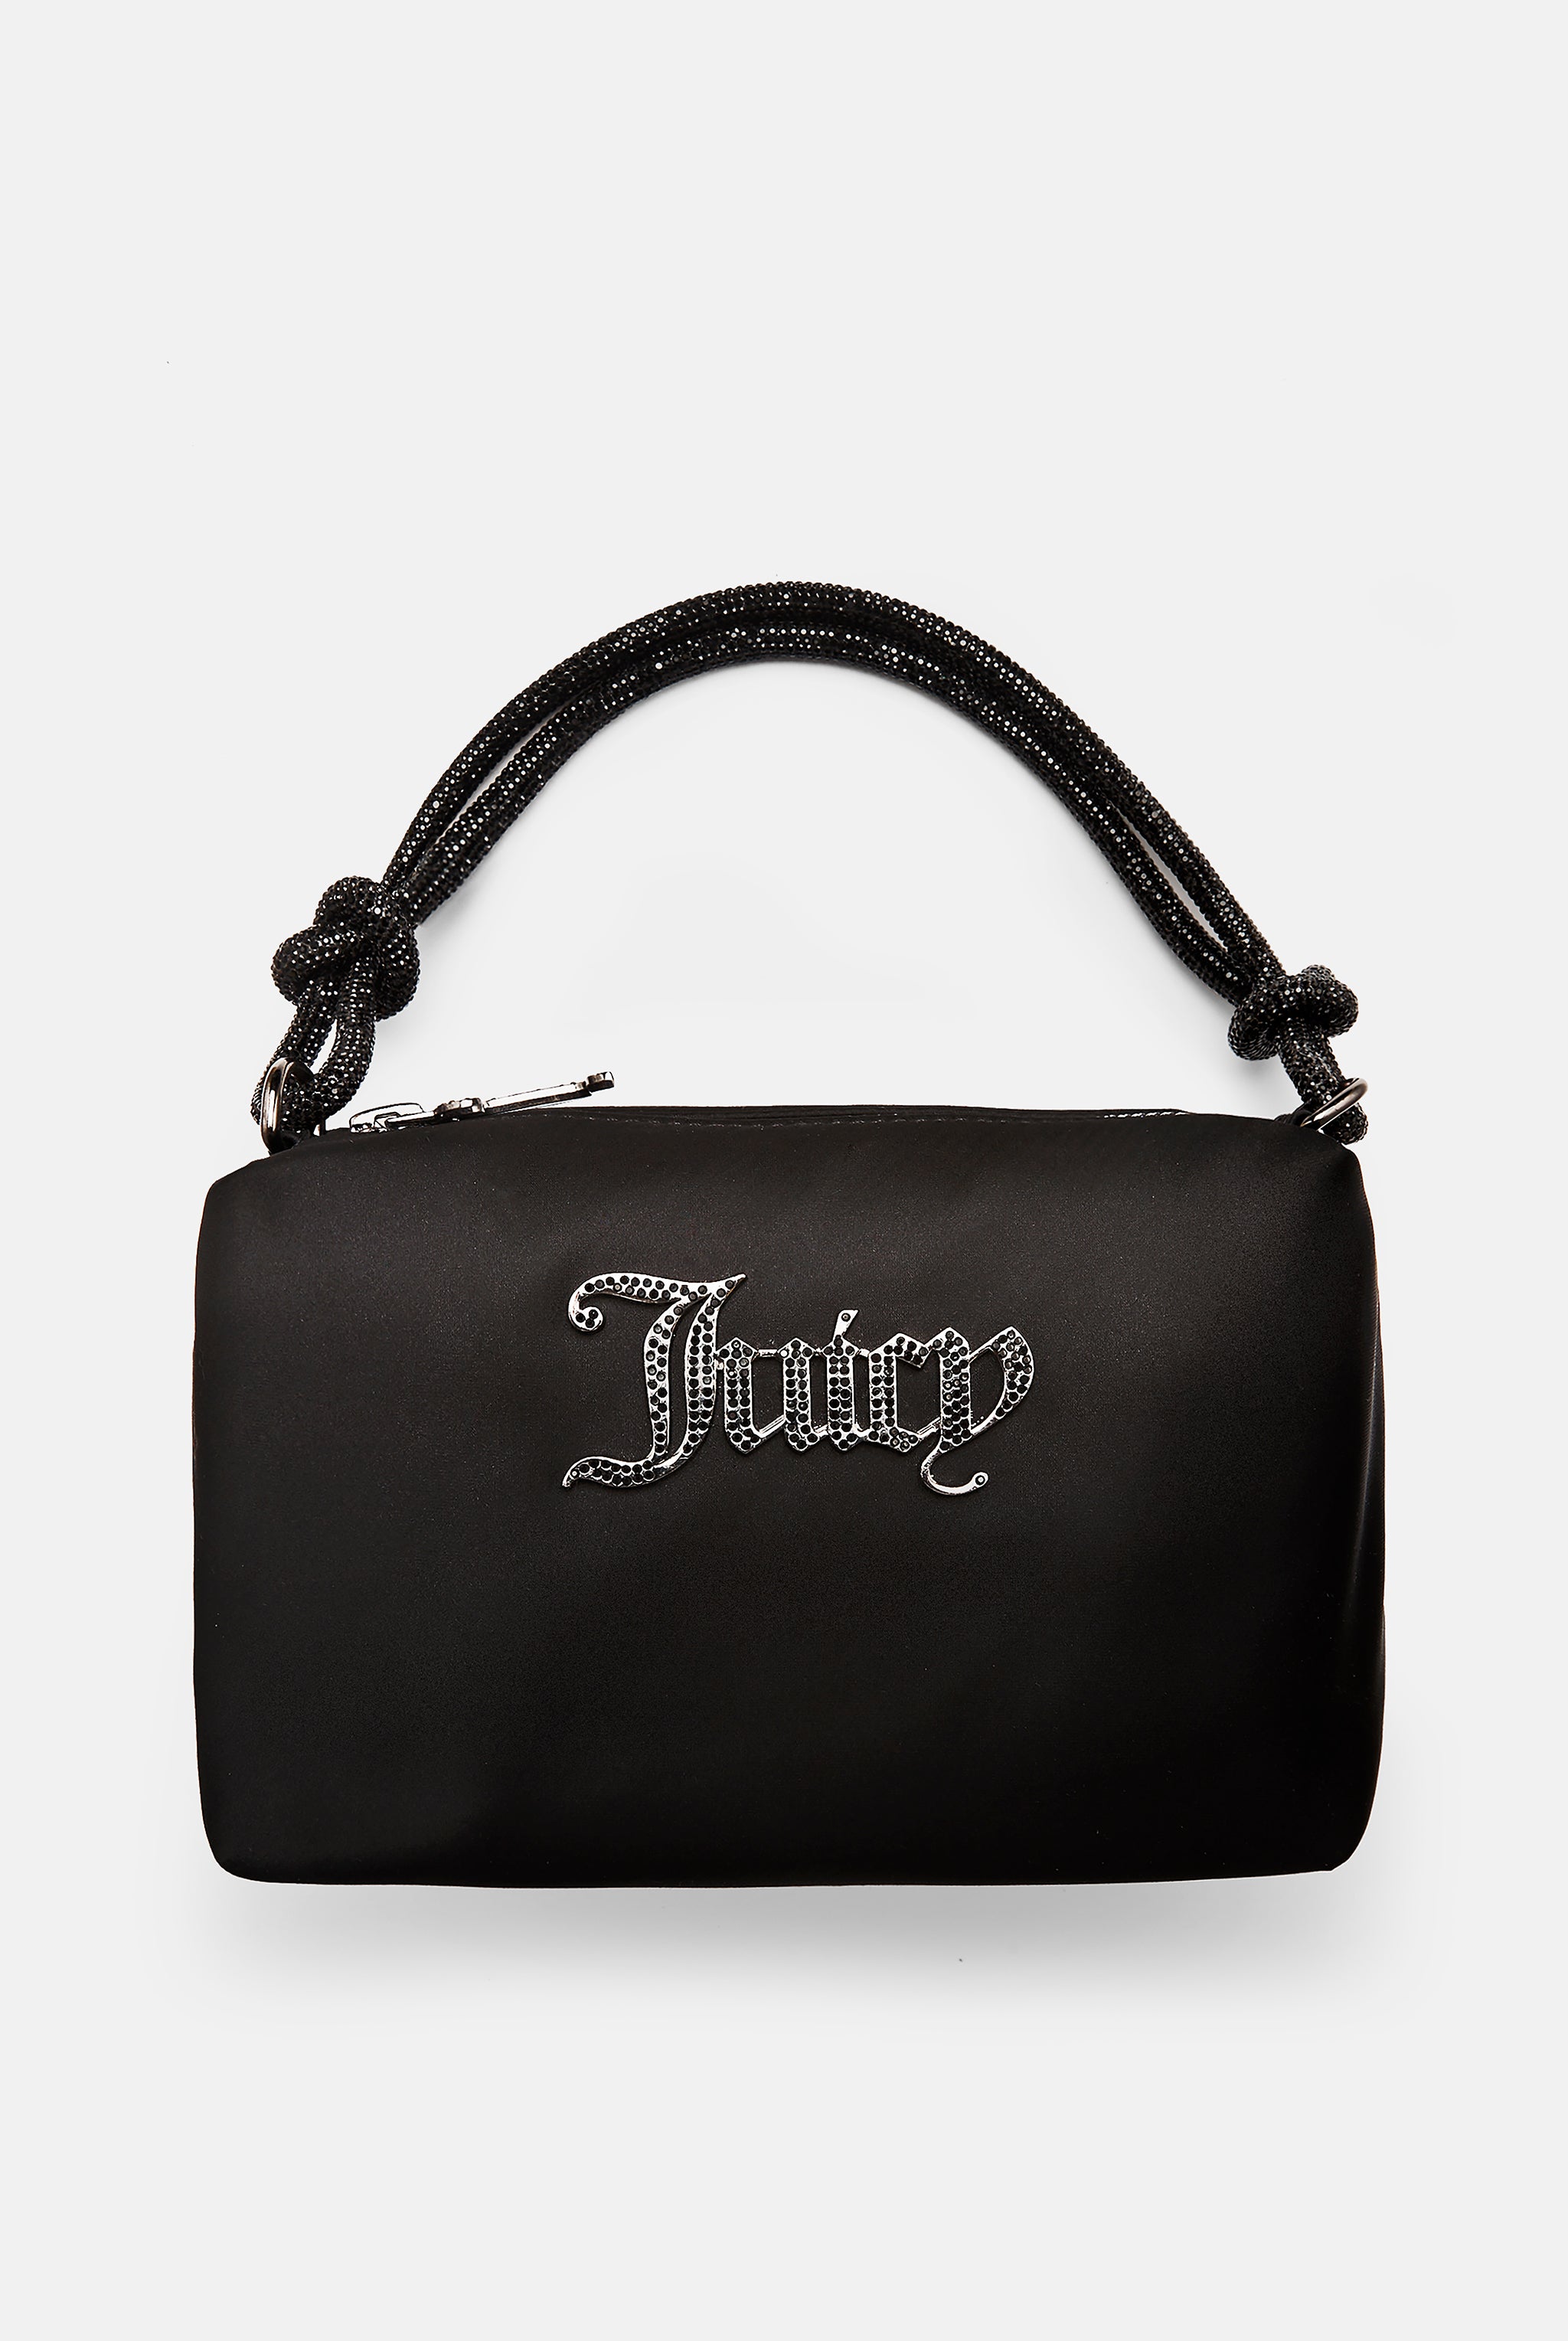 Can someone confirm which year this Juicy Couture bag was made and whether  it's authentic or not? : r/JuicyCouture